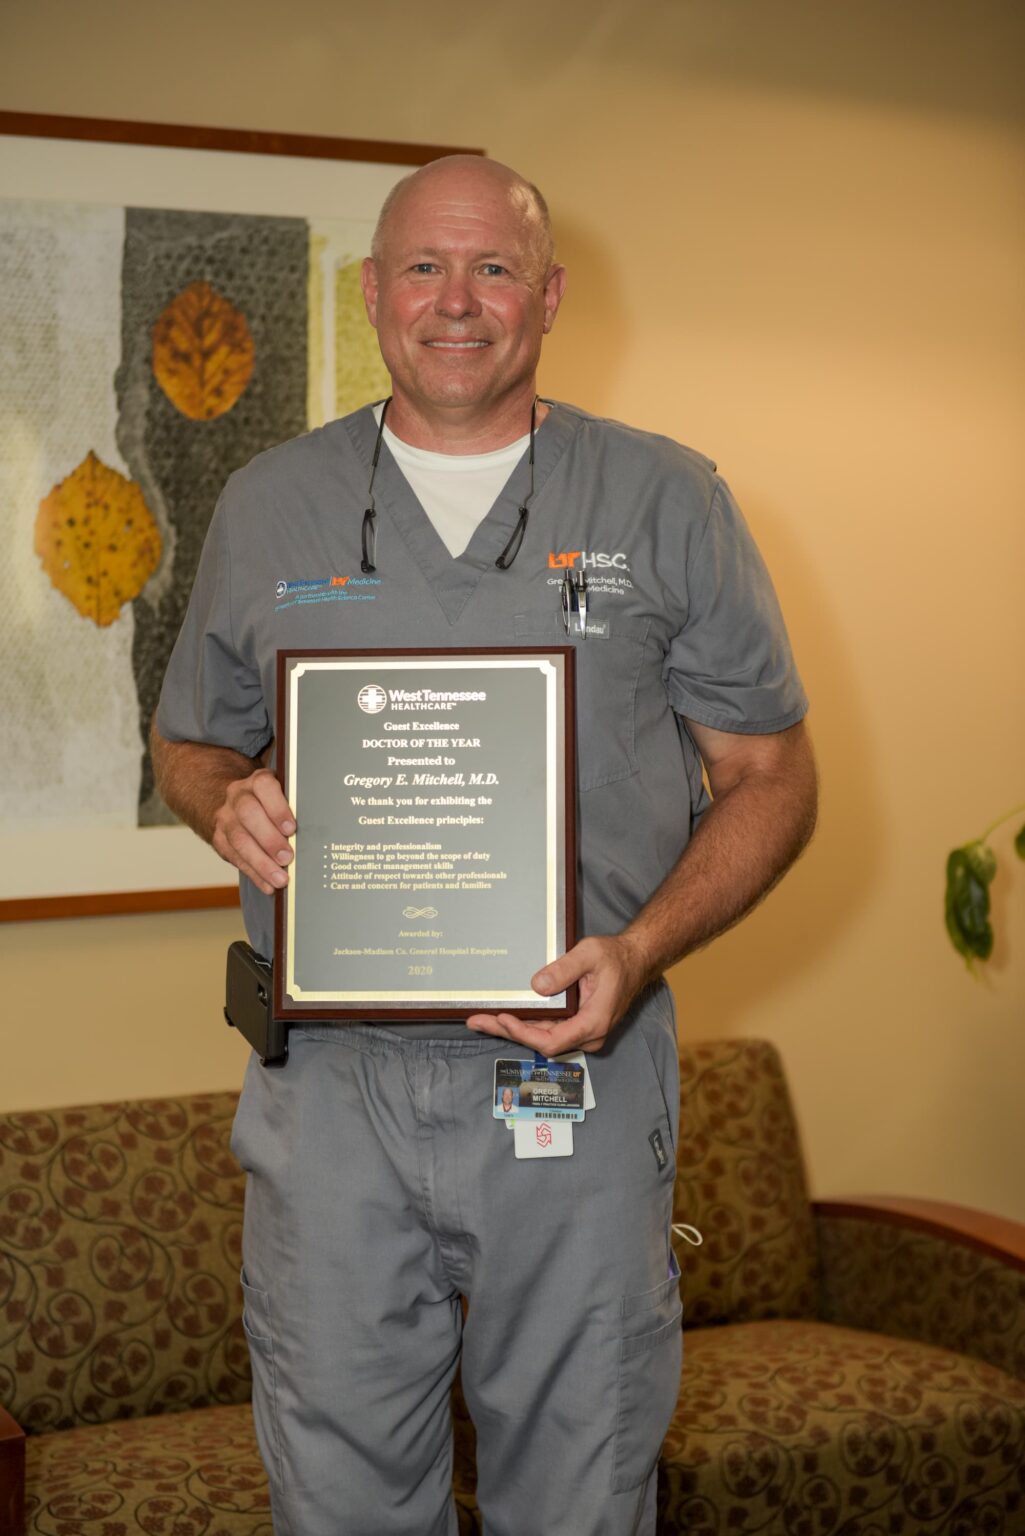 2020 DOCTOR OF THE YEAR Gregory E. Mitchell, M.D. West Tennessee